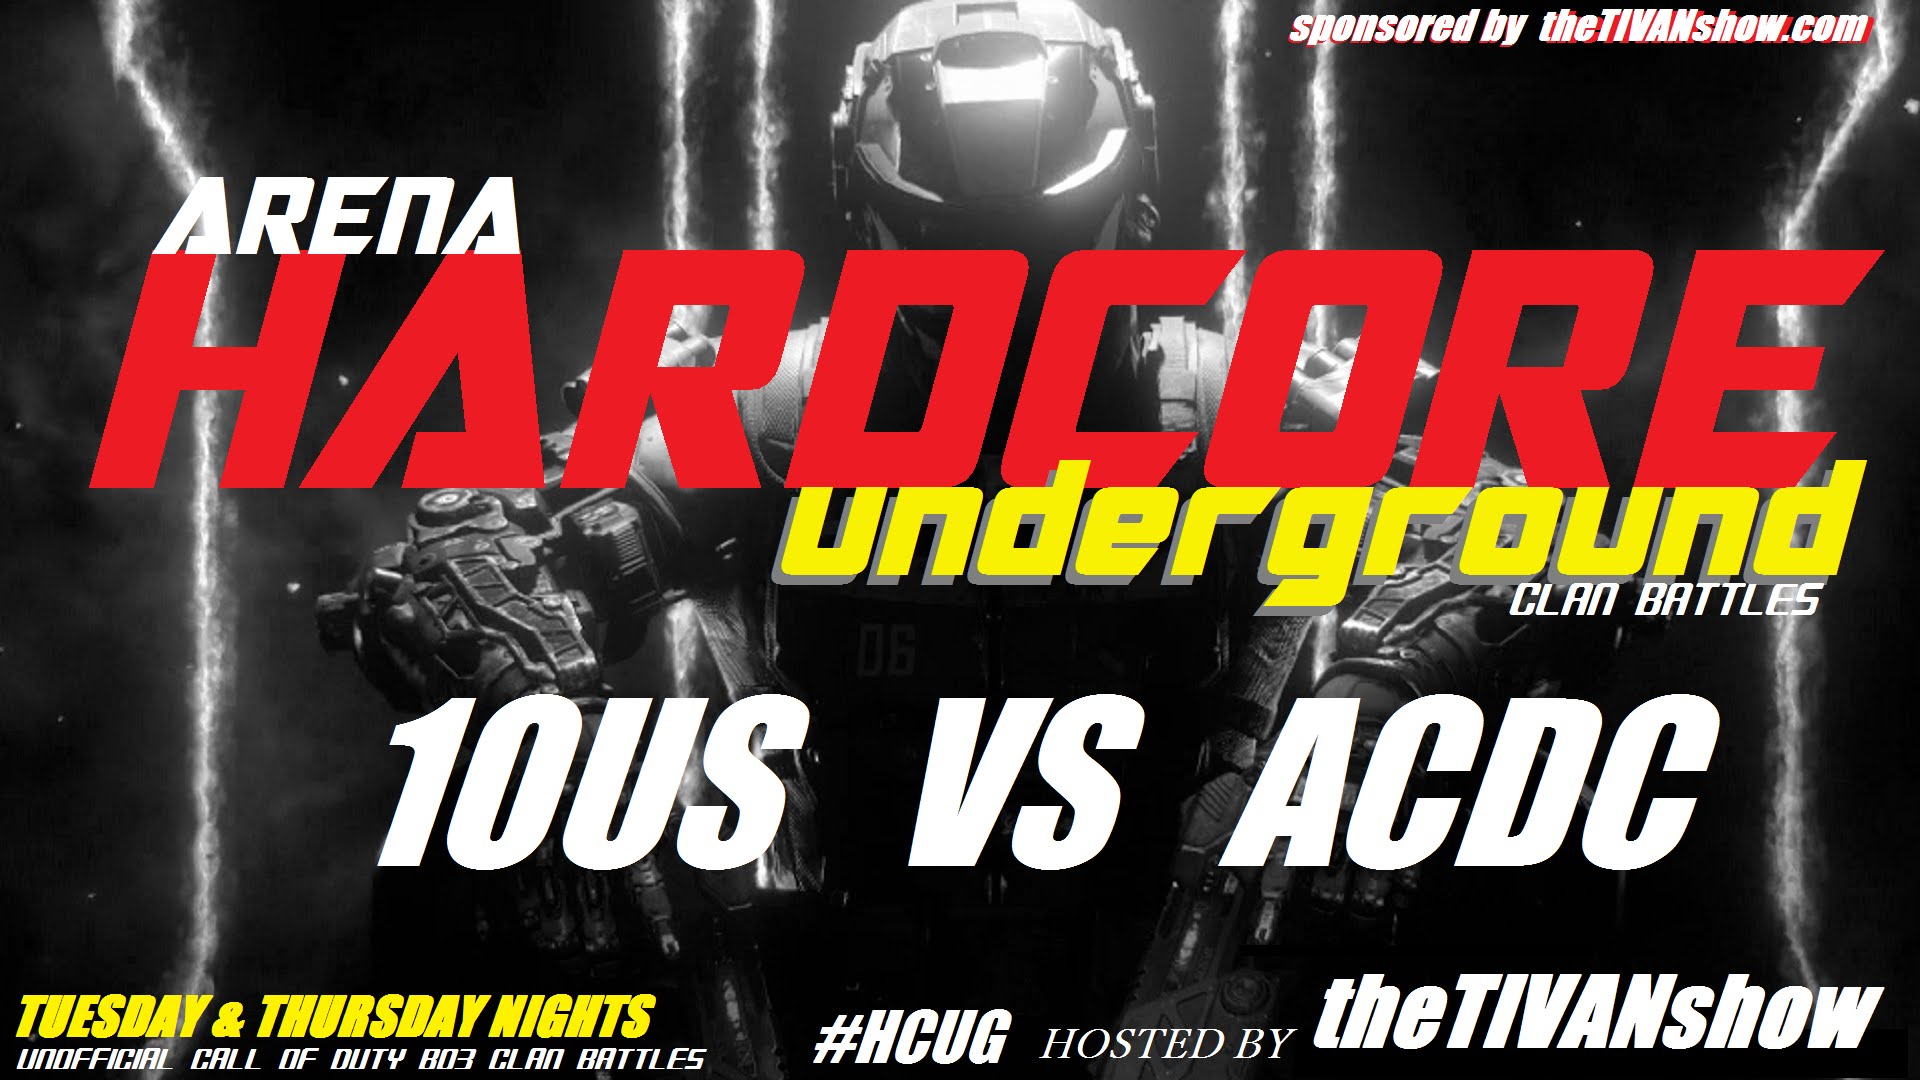 CALL OF DUTY BO3 ARENA HARDCORE UNDERGROUND CLAN BATTLE 1OUS vs ACDC